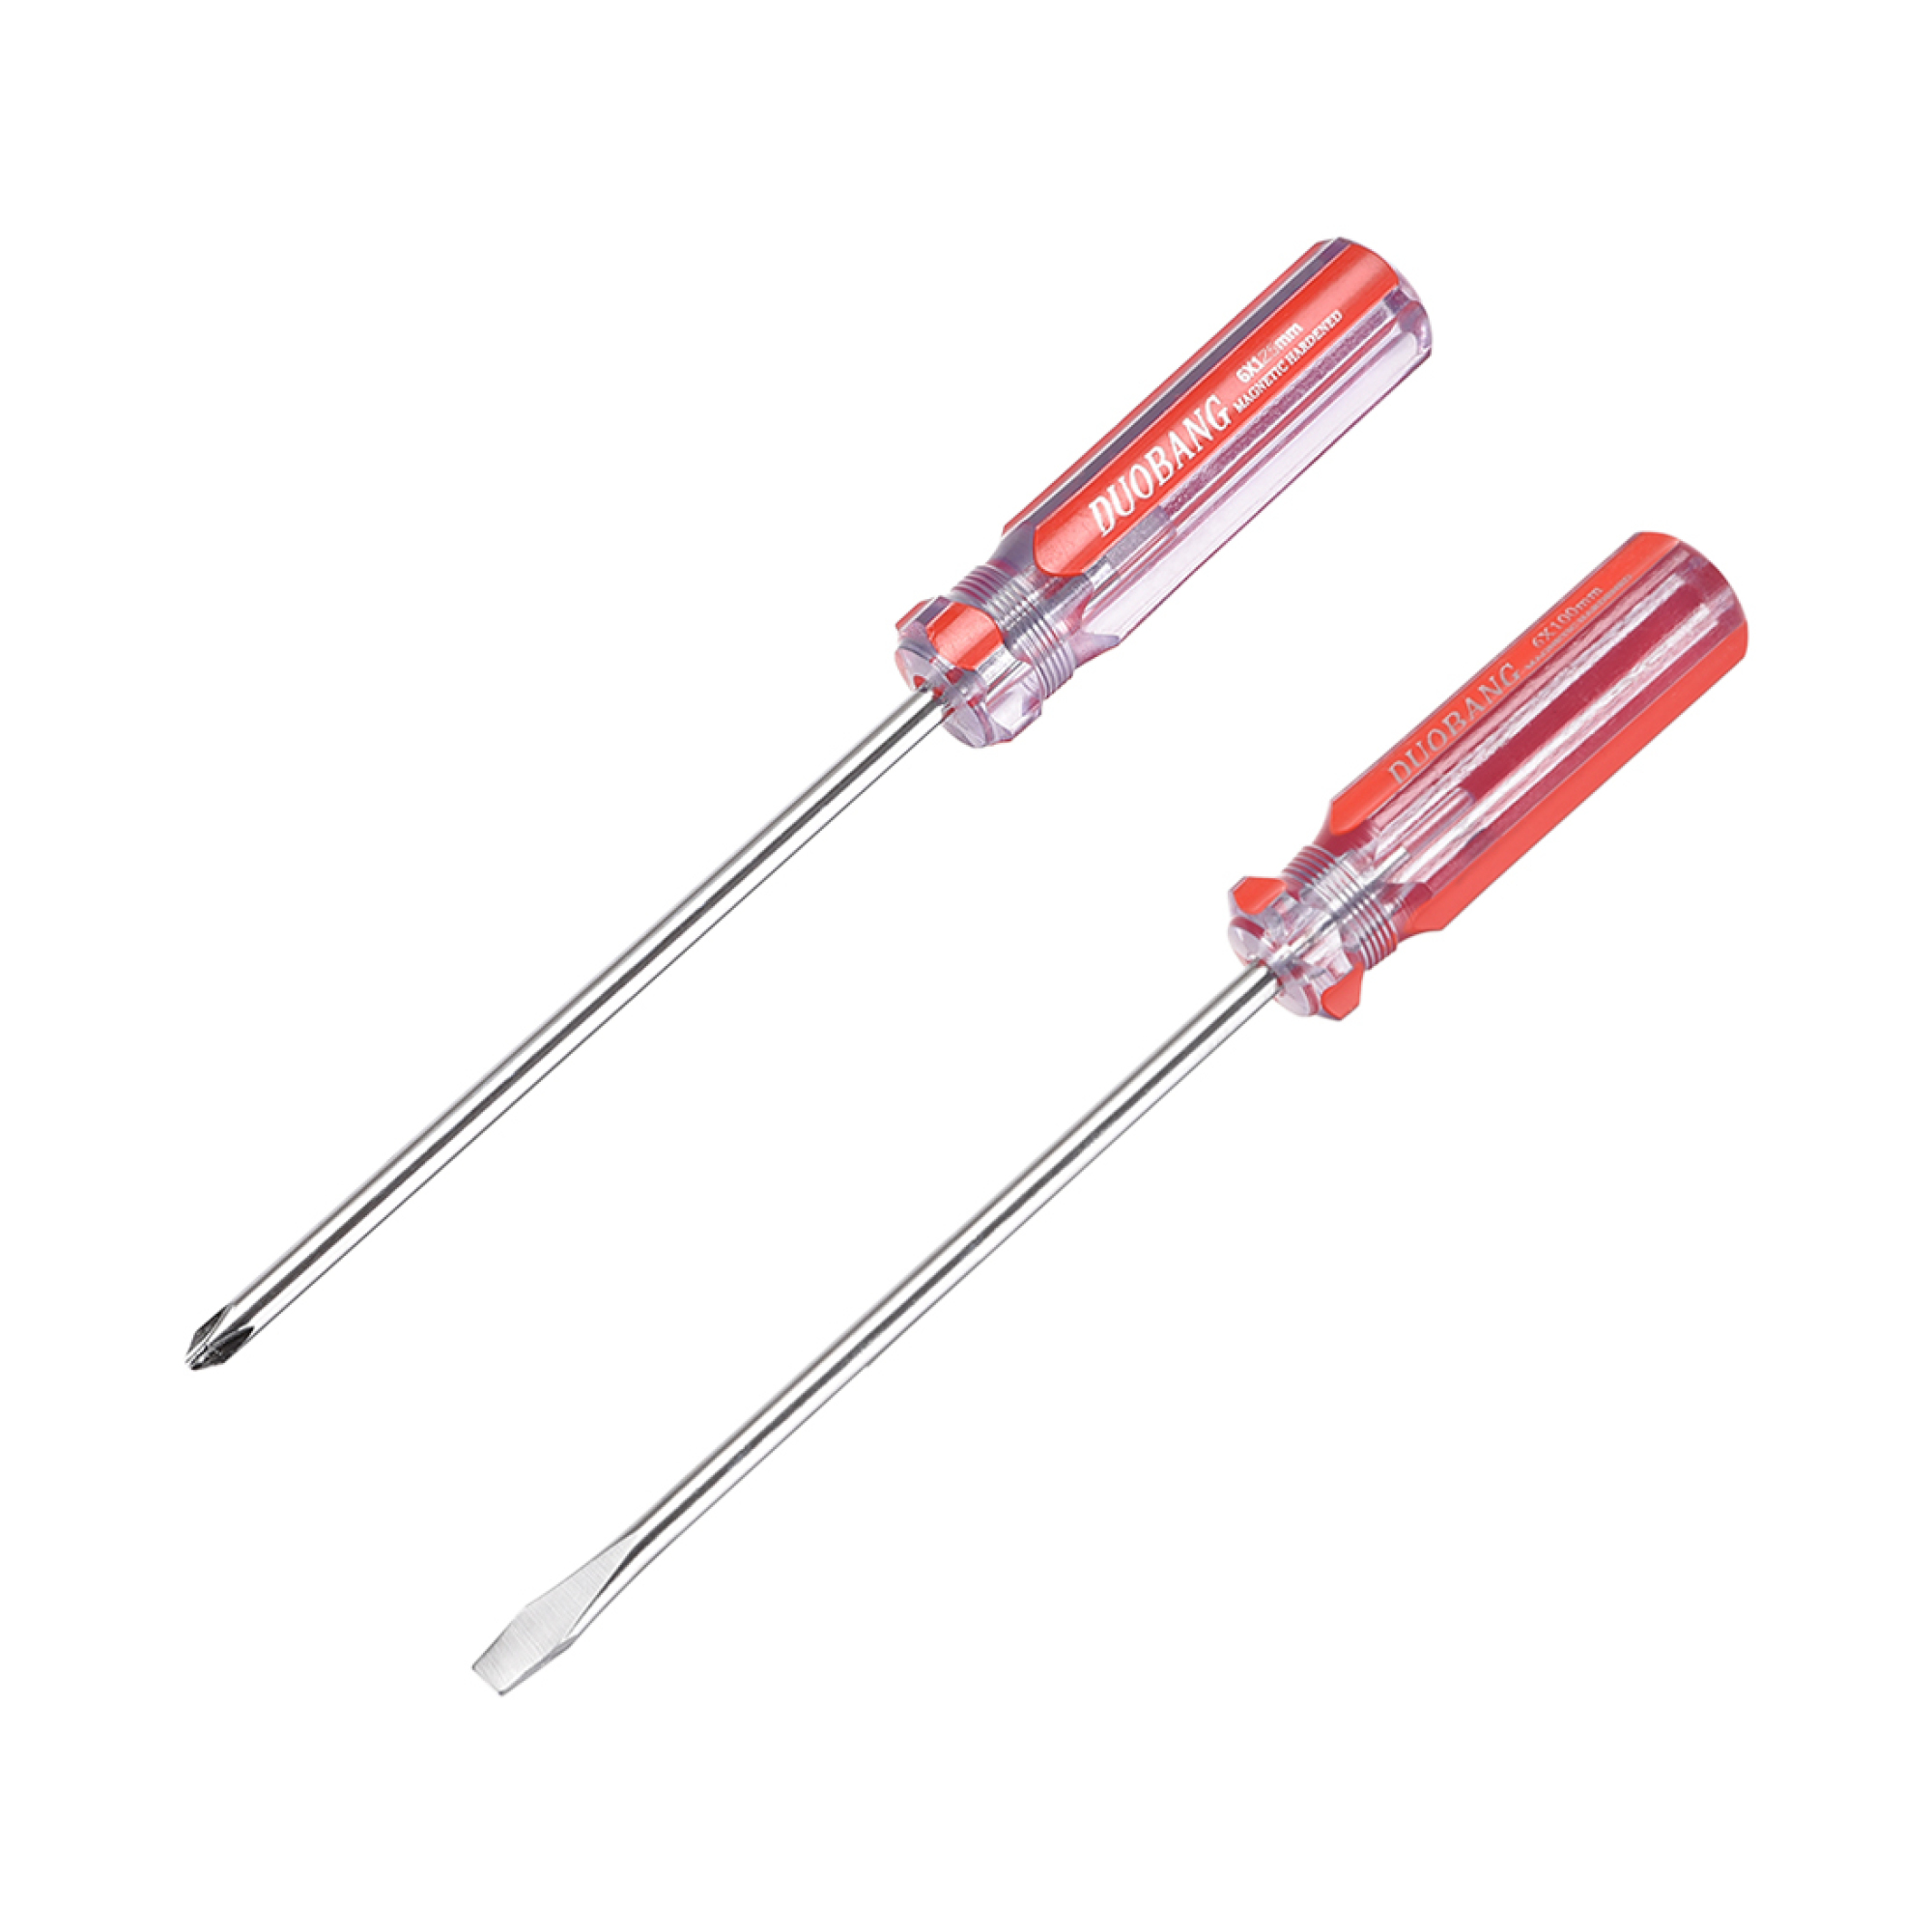 PH2 Phillips / 6mm Slotted Magnetic Screwdriver Set of 2pc